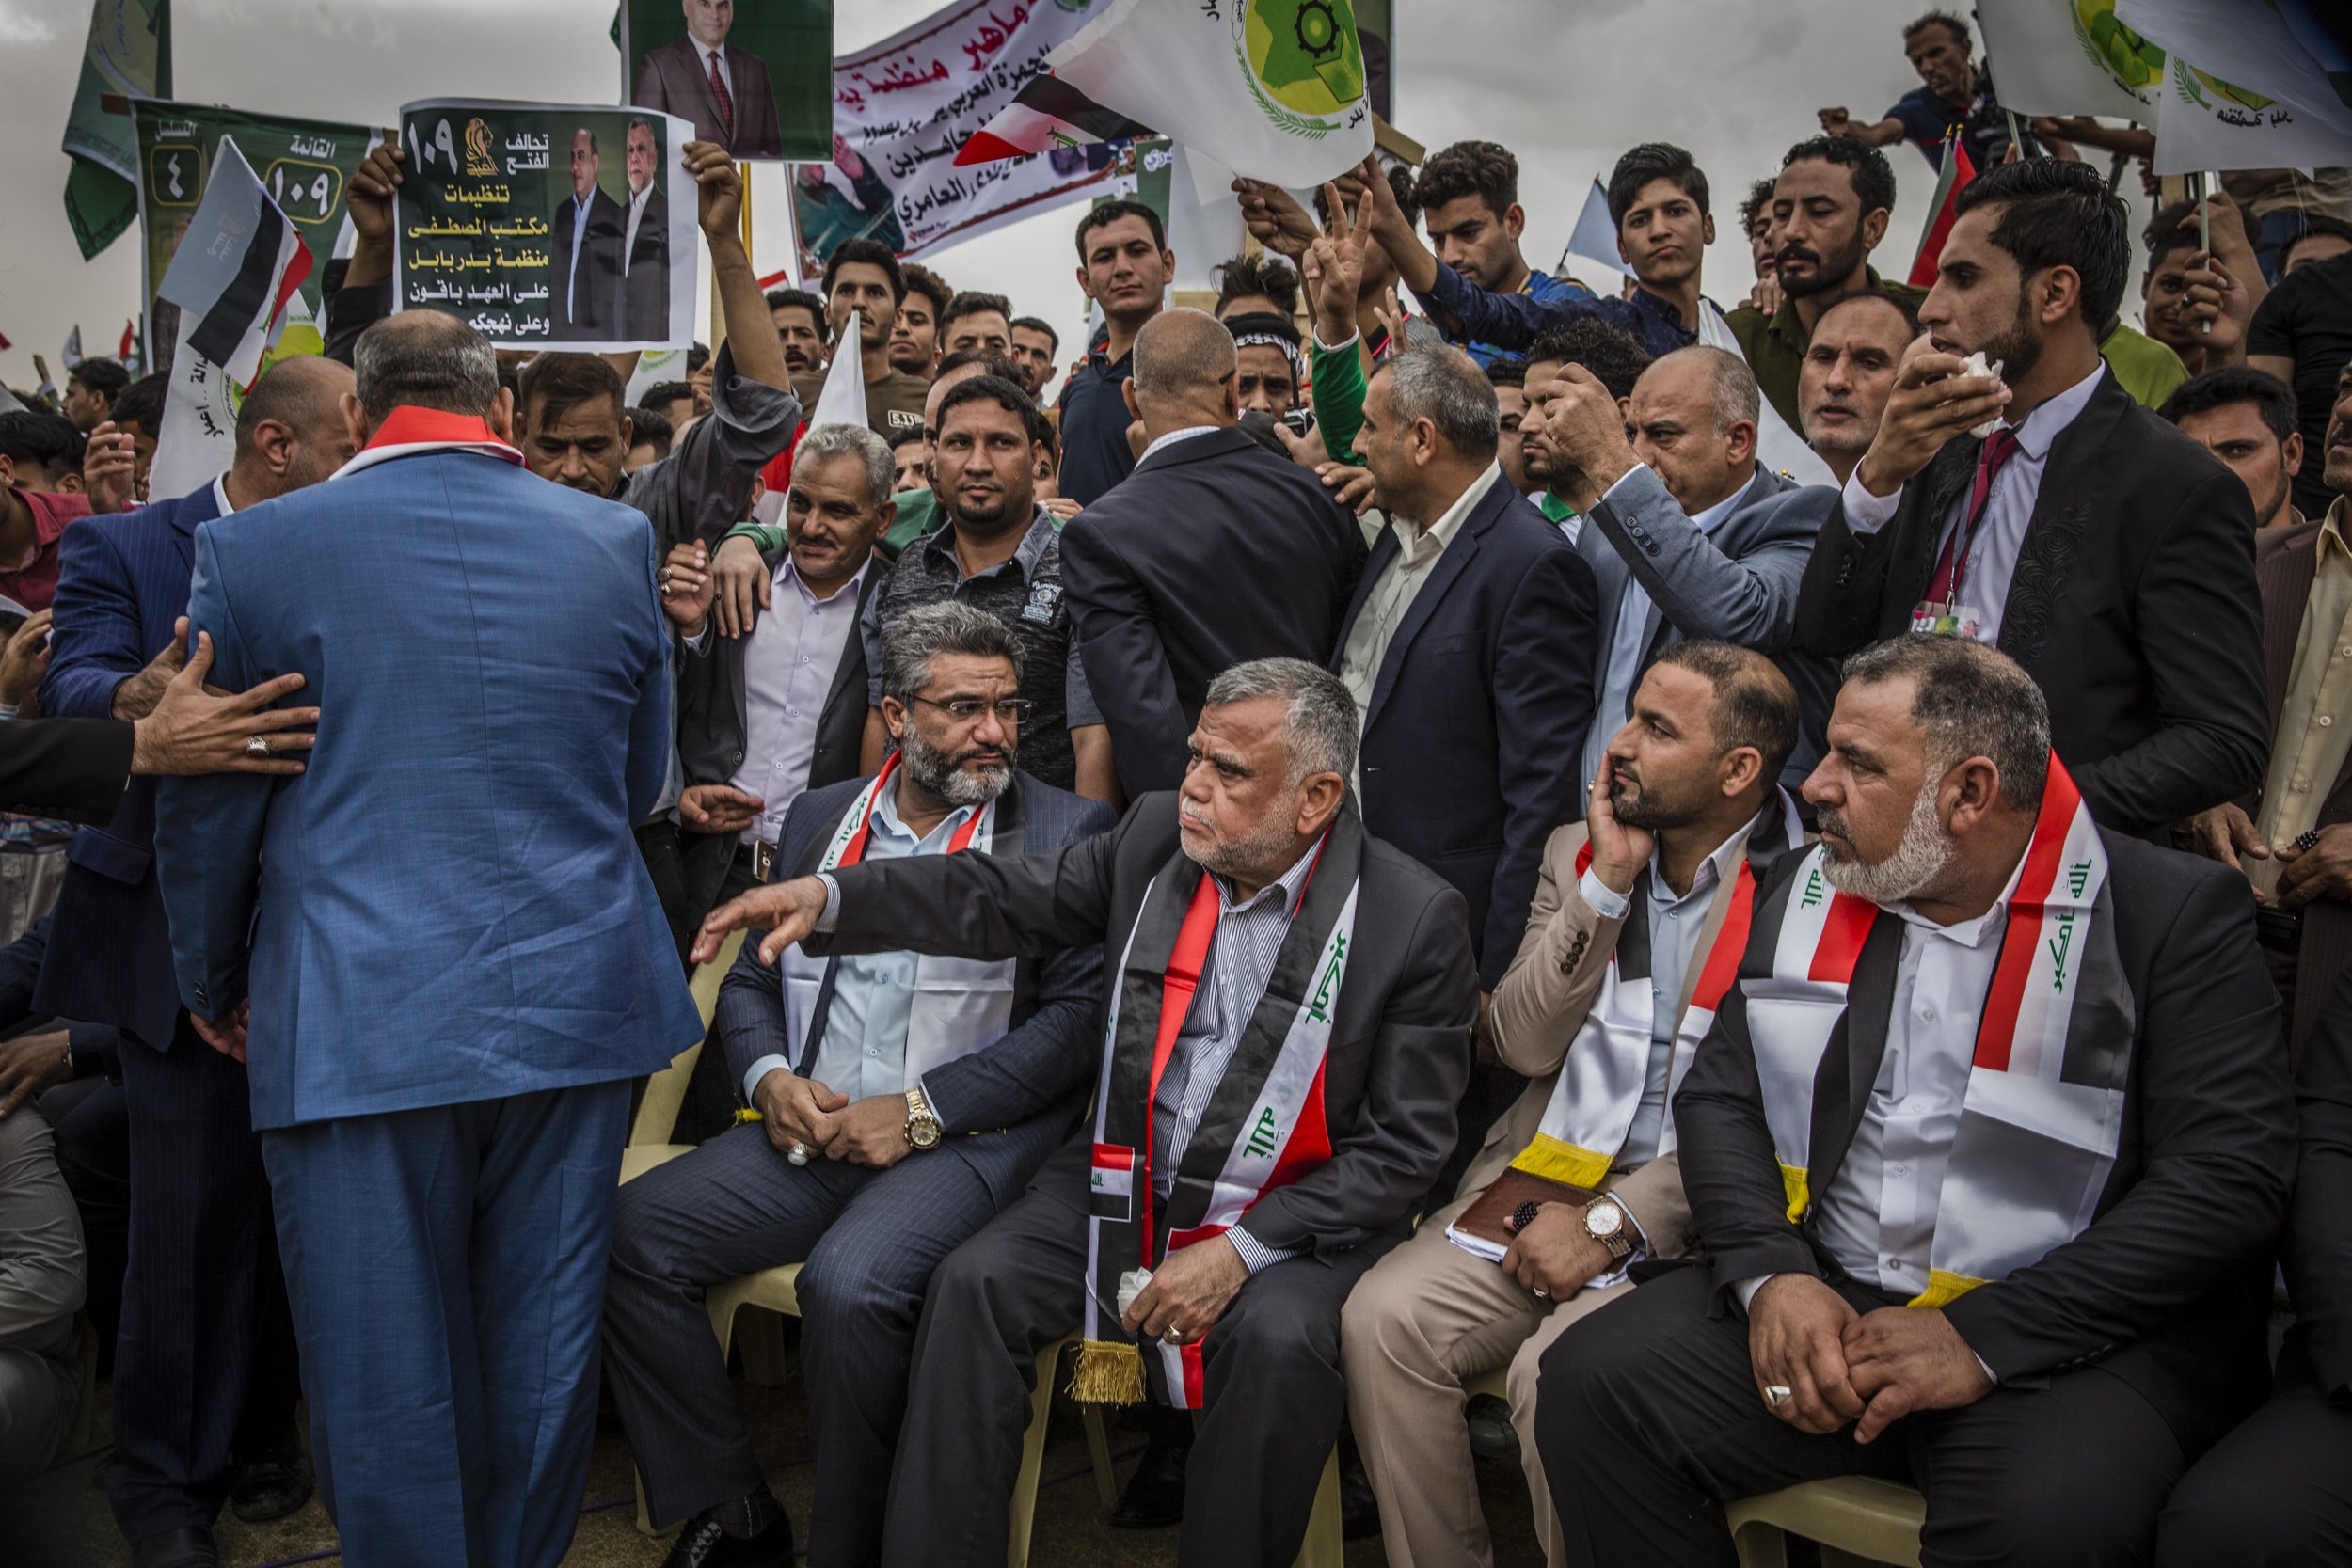  Hadi al-Ameri, the head of Fatah and leader of the Badr militia, attended a party rally on the campaign trail in Hillah in the run up to Iraq’s parliamentary elections in 2018. 